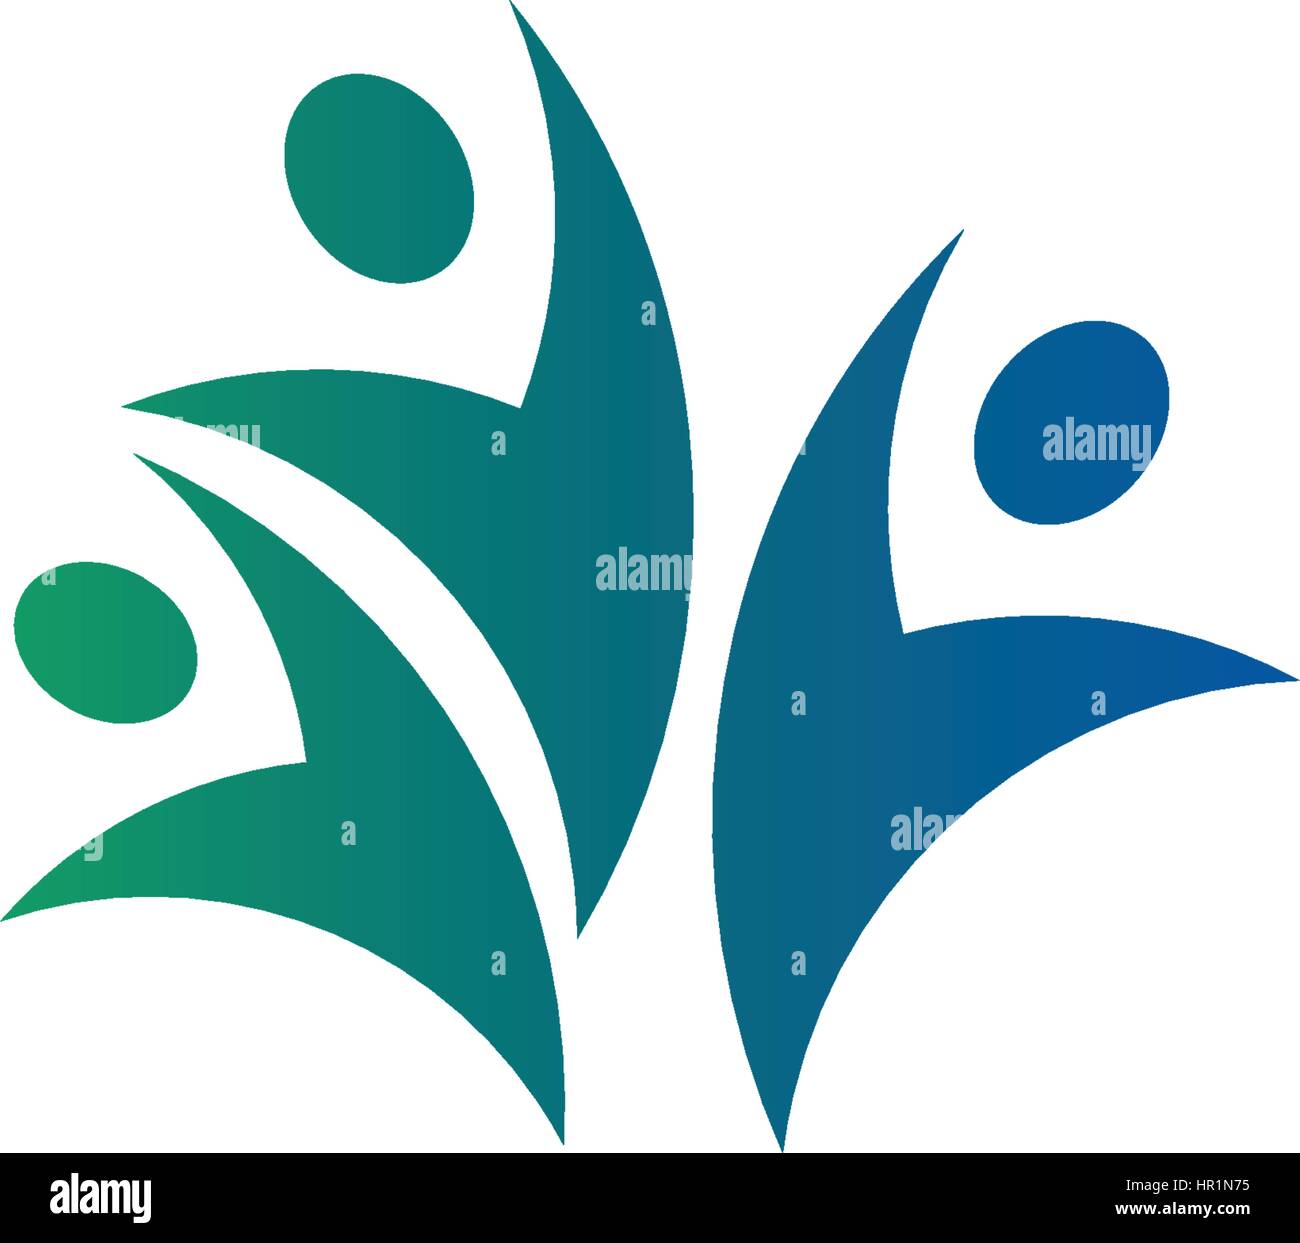 Isolated abstract blue and green color group of three people logo on white background vector illustration. Stock Vector